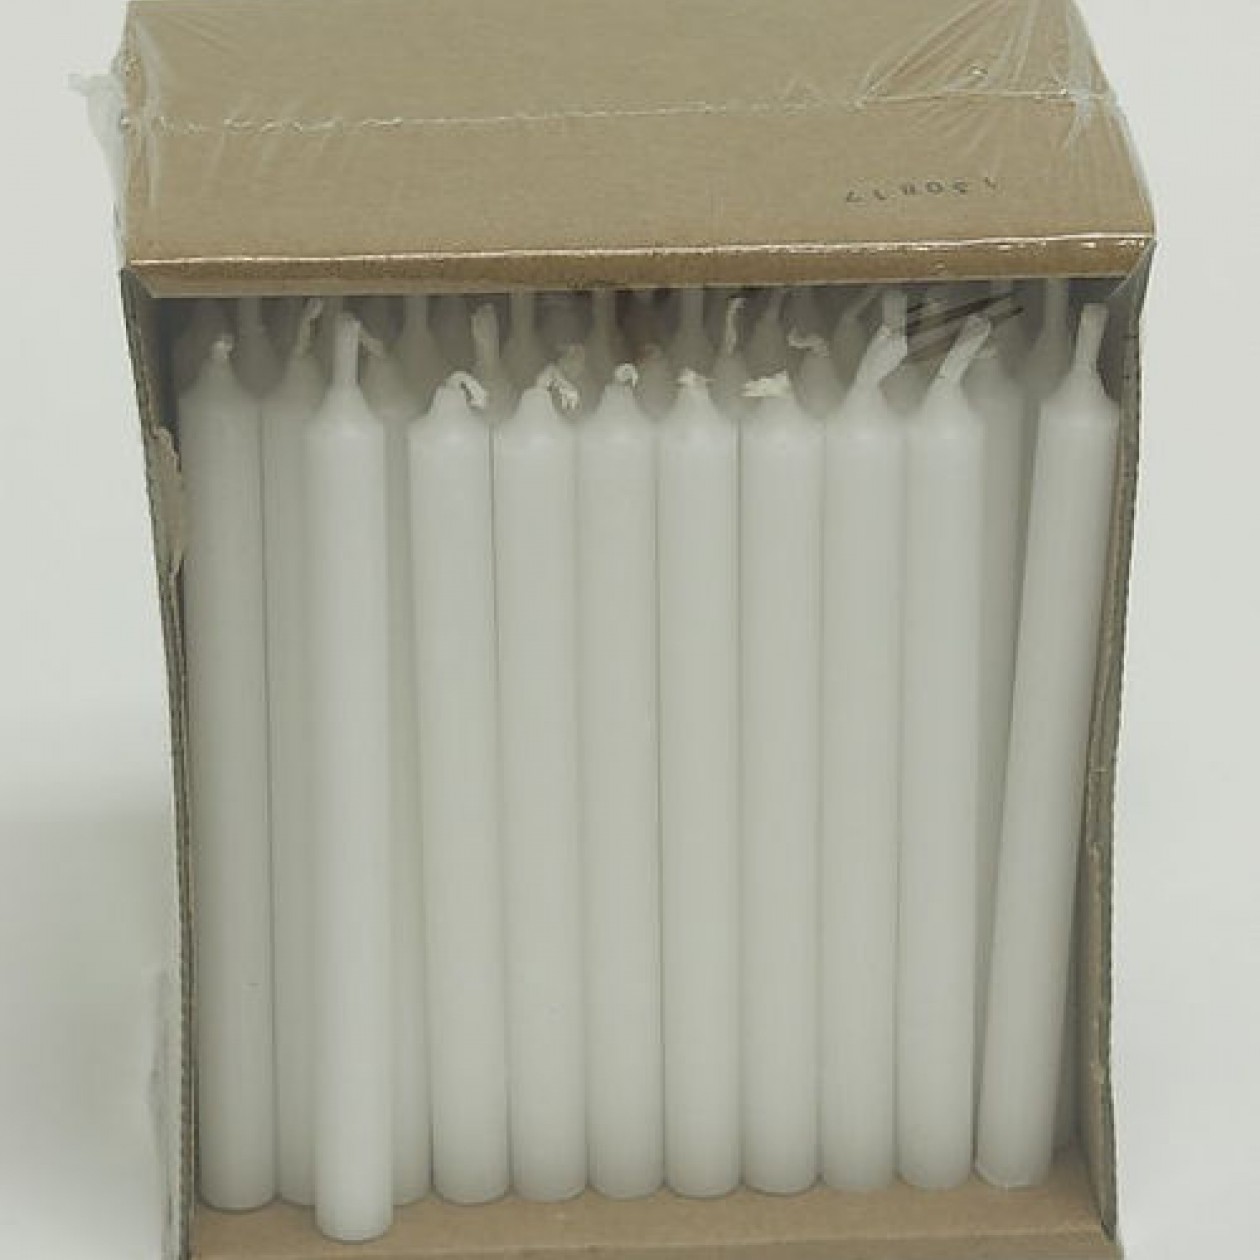 Wax White Candles (Pack of 25)